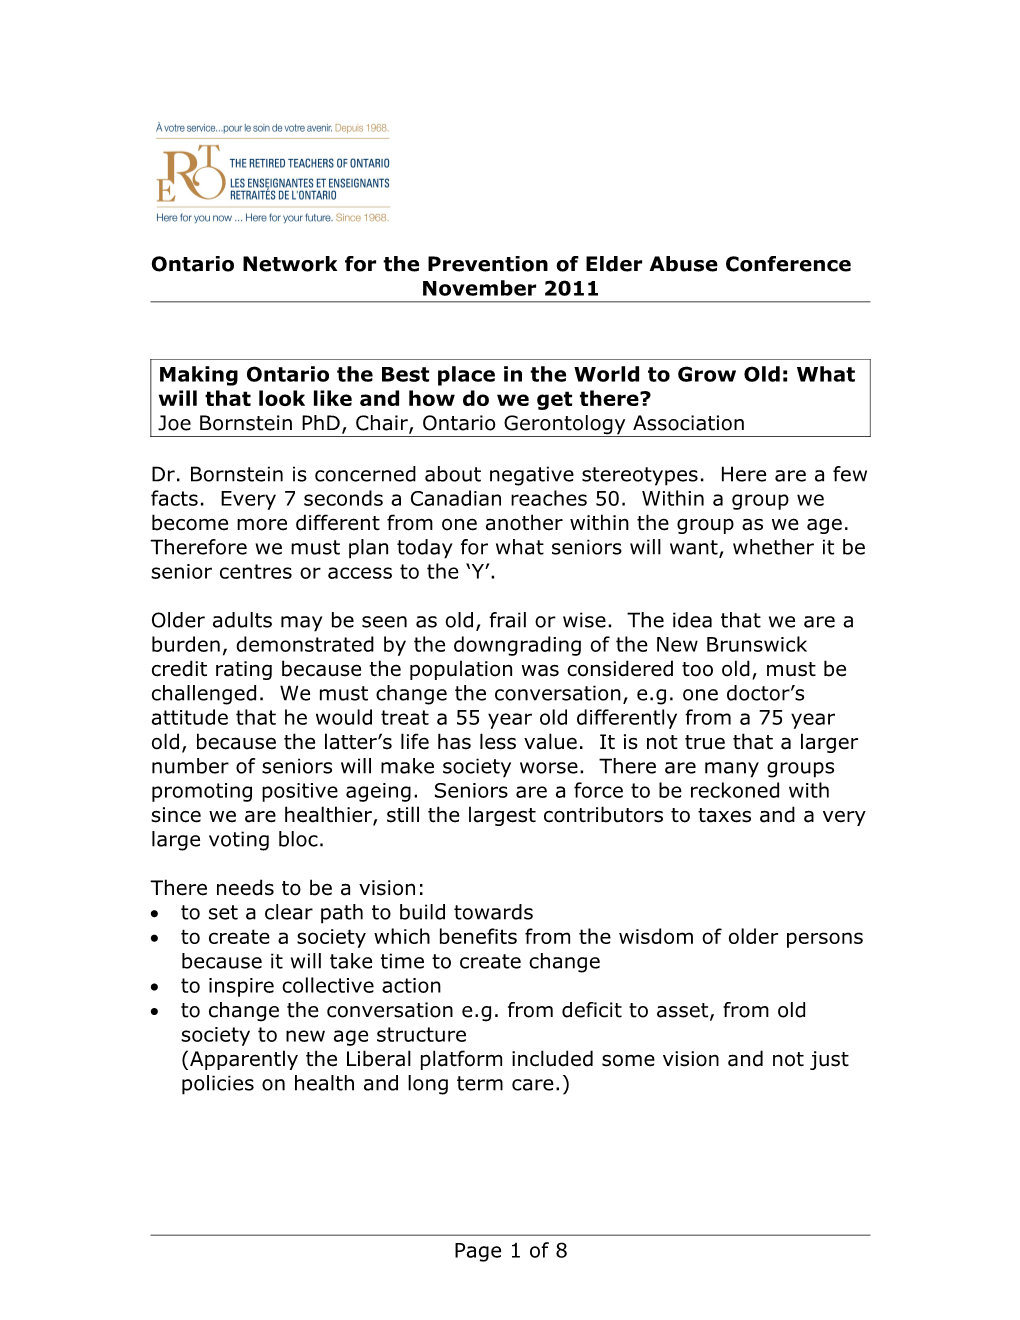 Ontario Network for the Prevention of Elder Abuse Conference